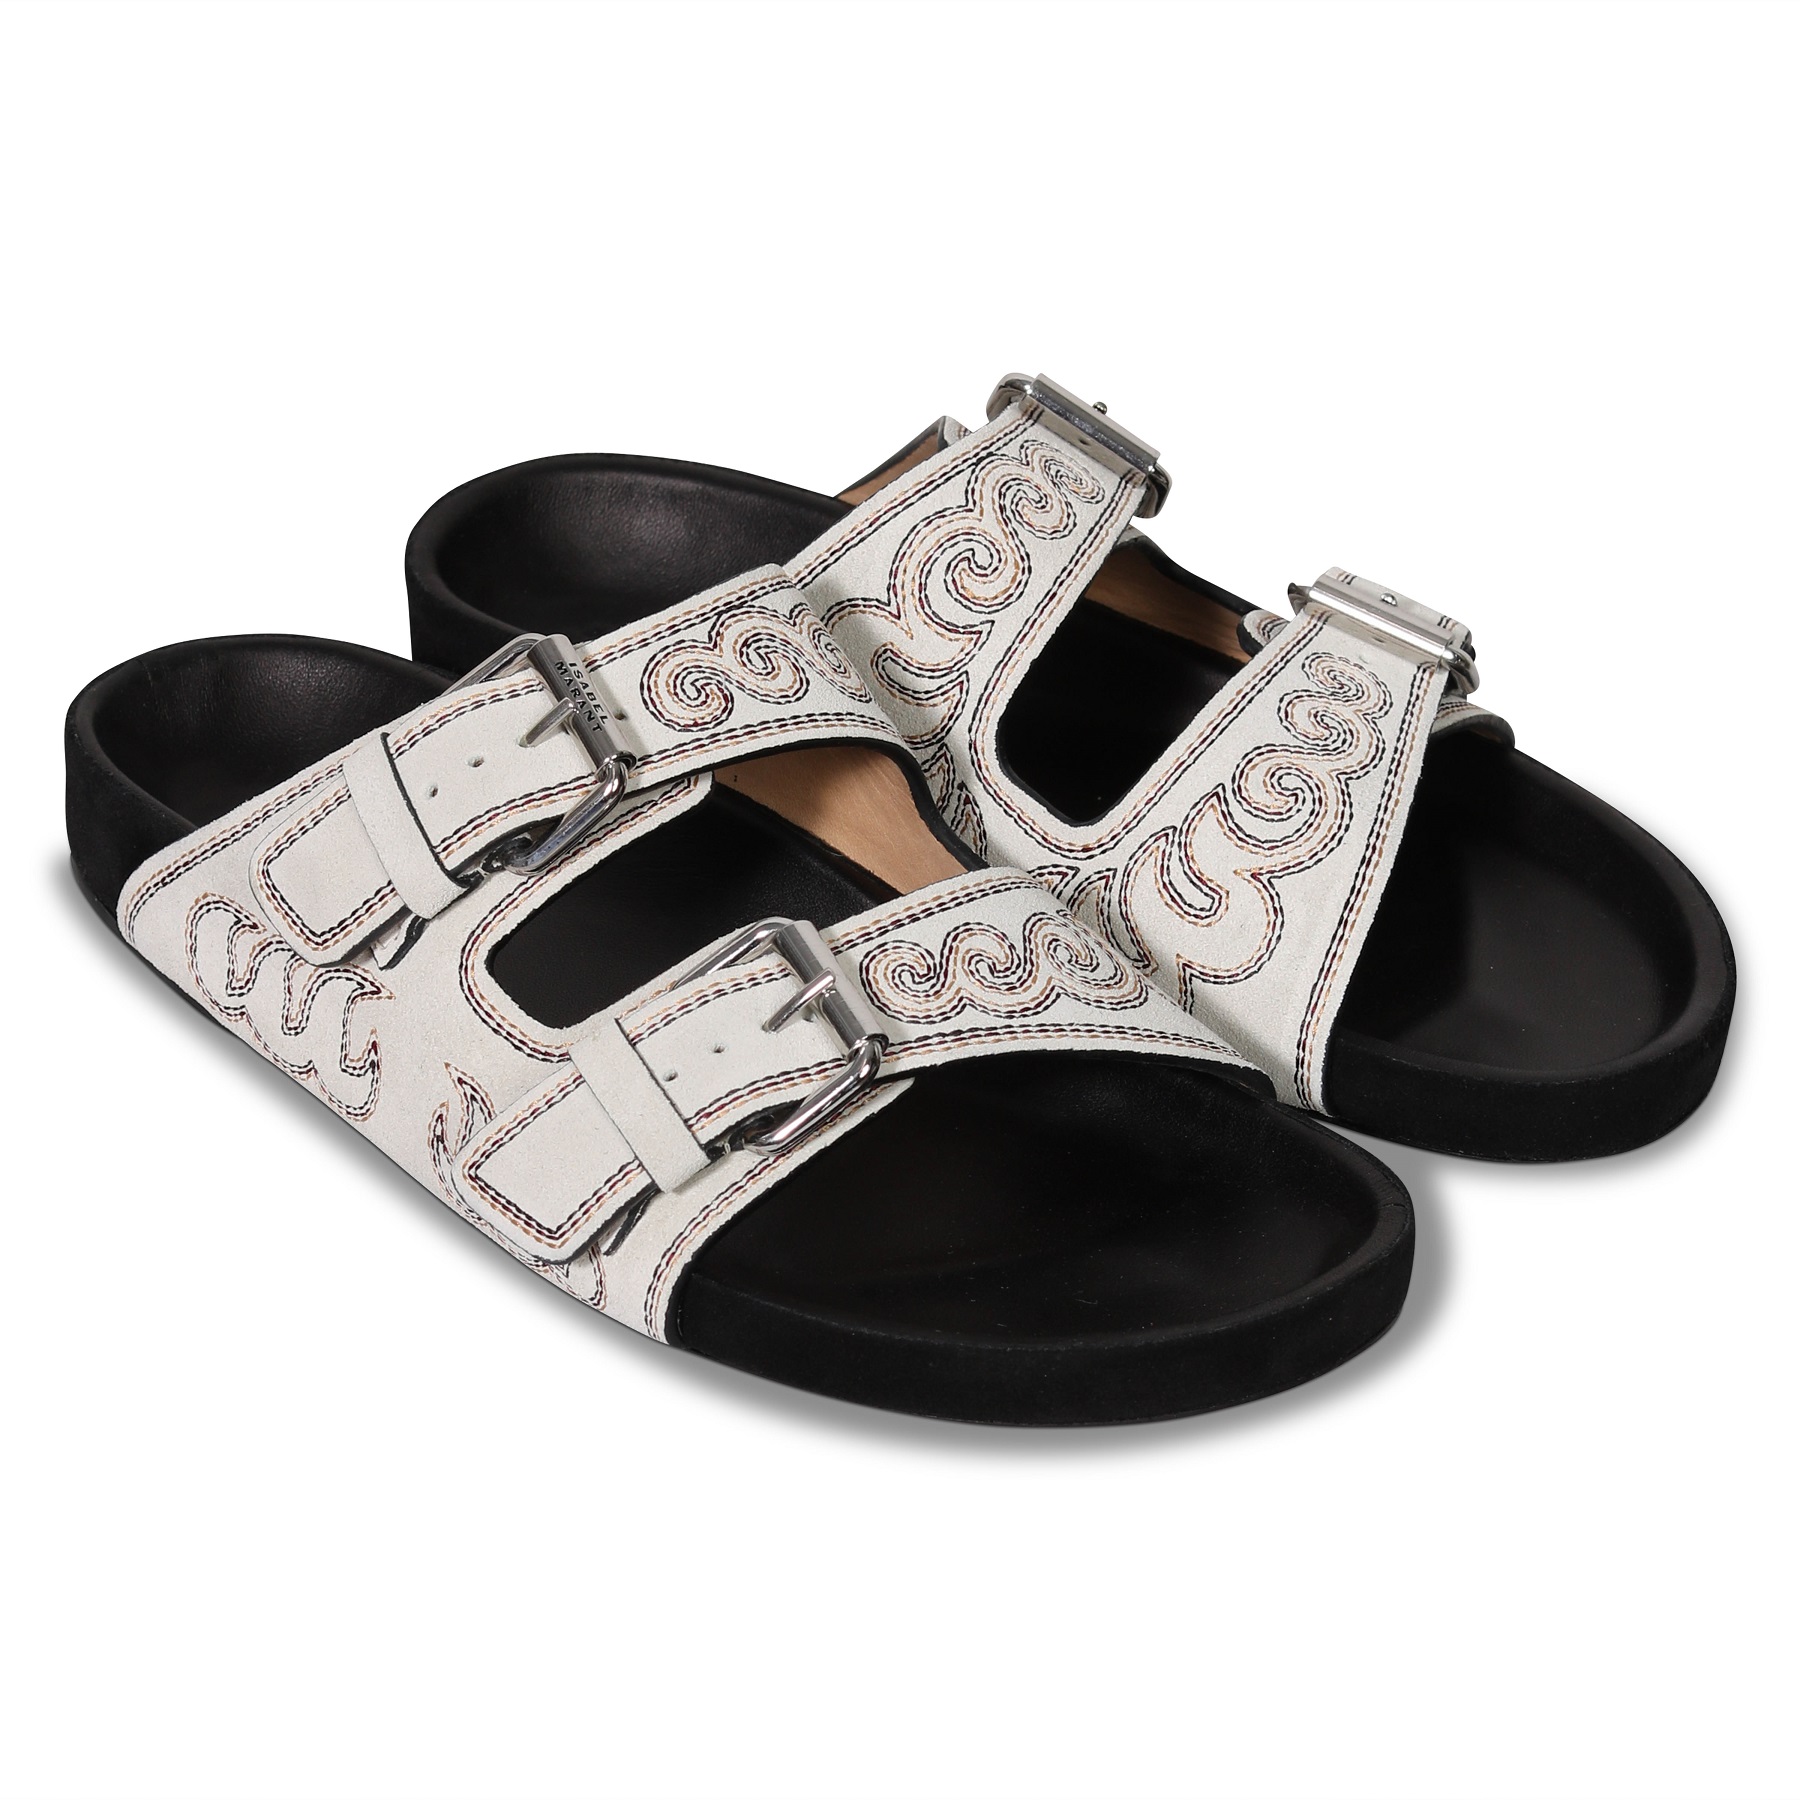 ISABEL MARANT Lennyo Sandals with Stitching in Chalk 39